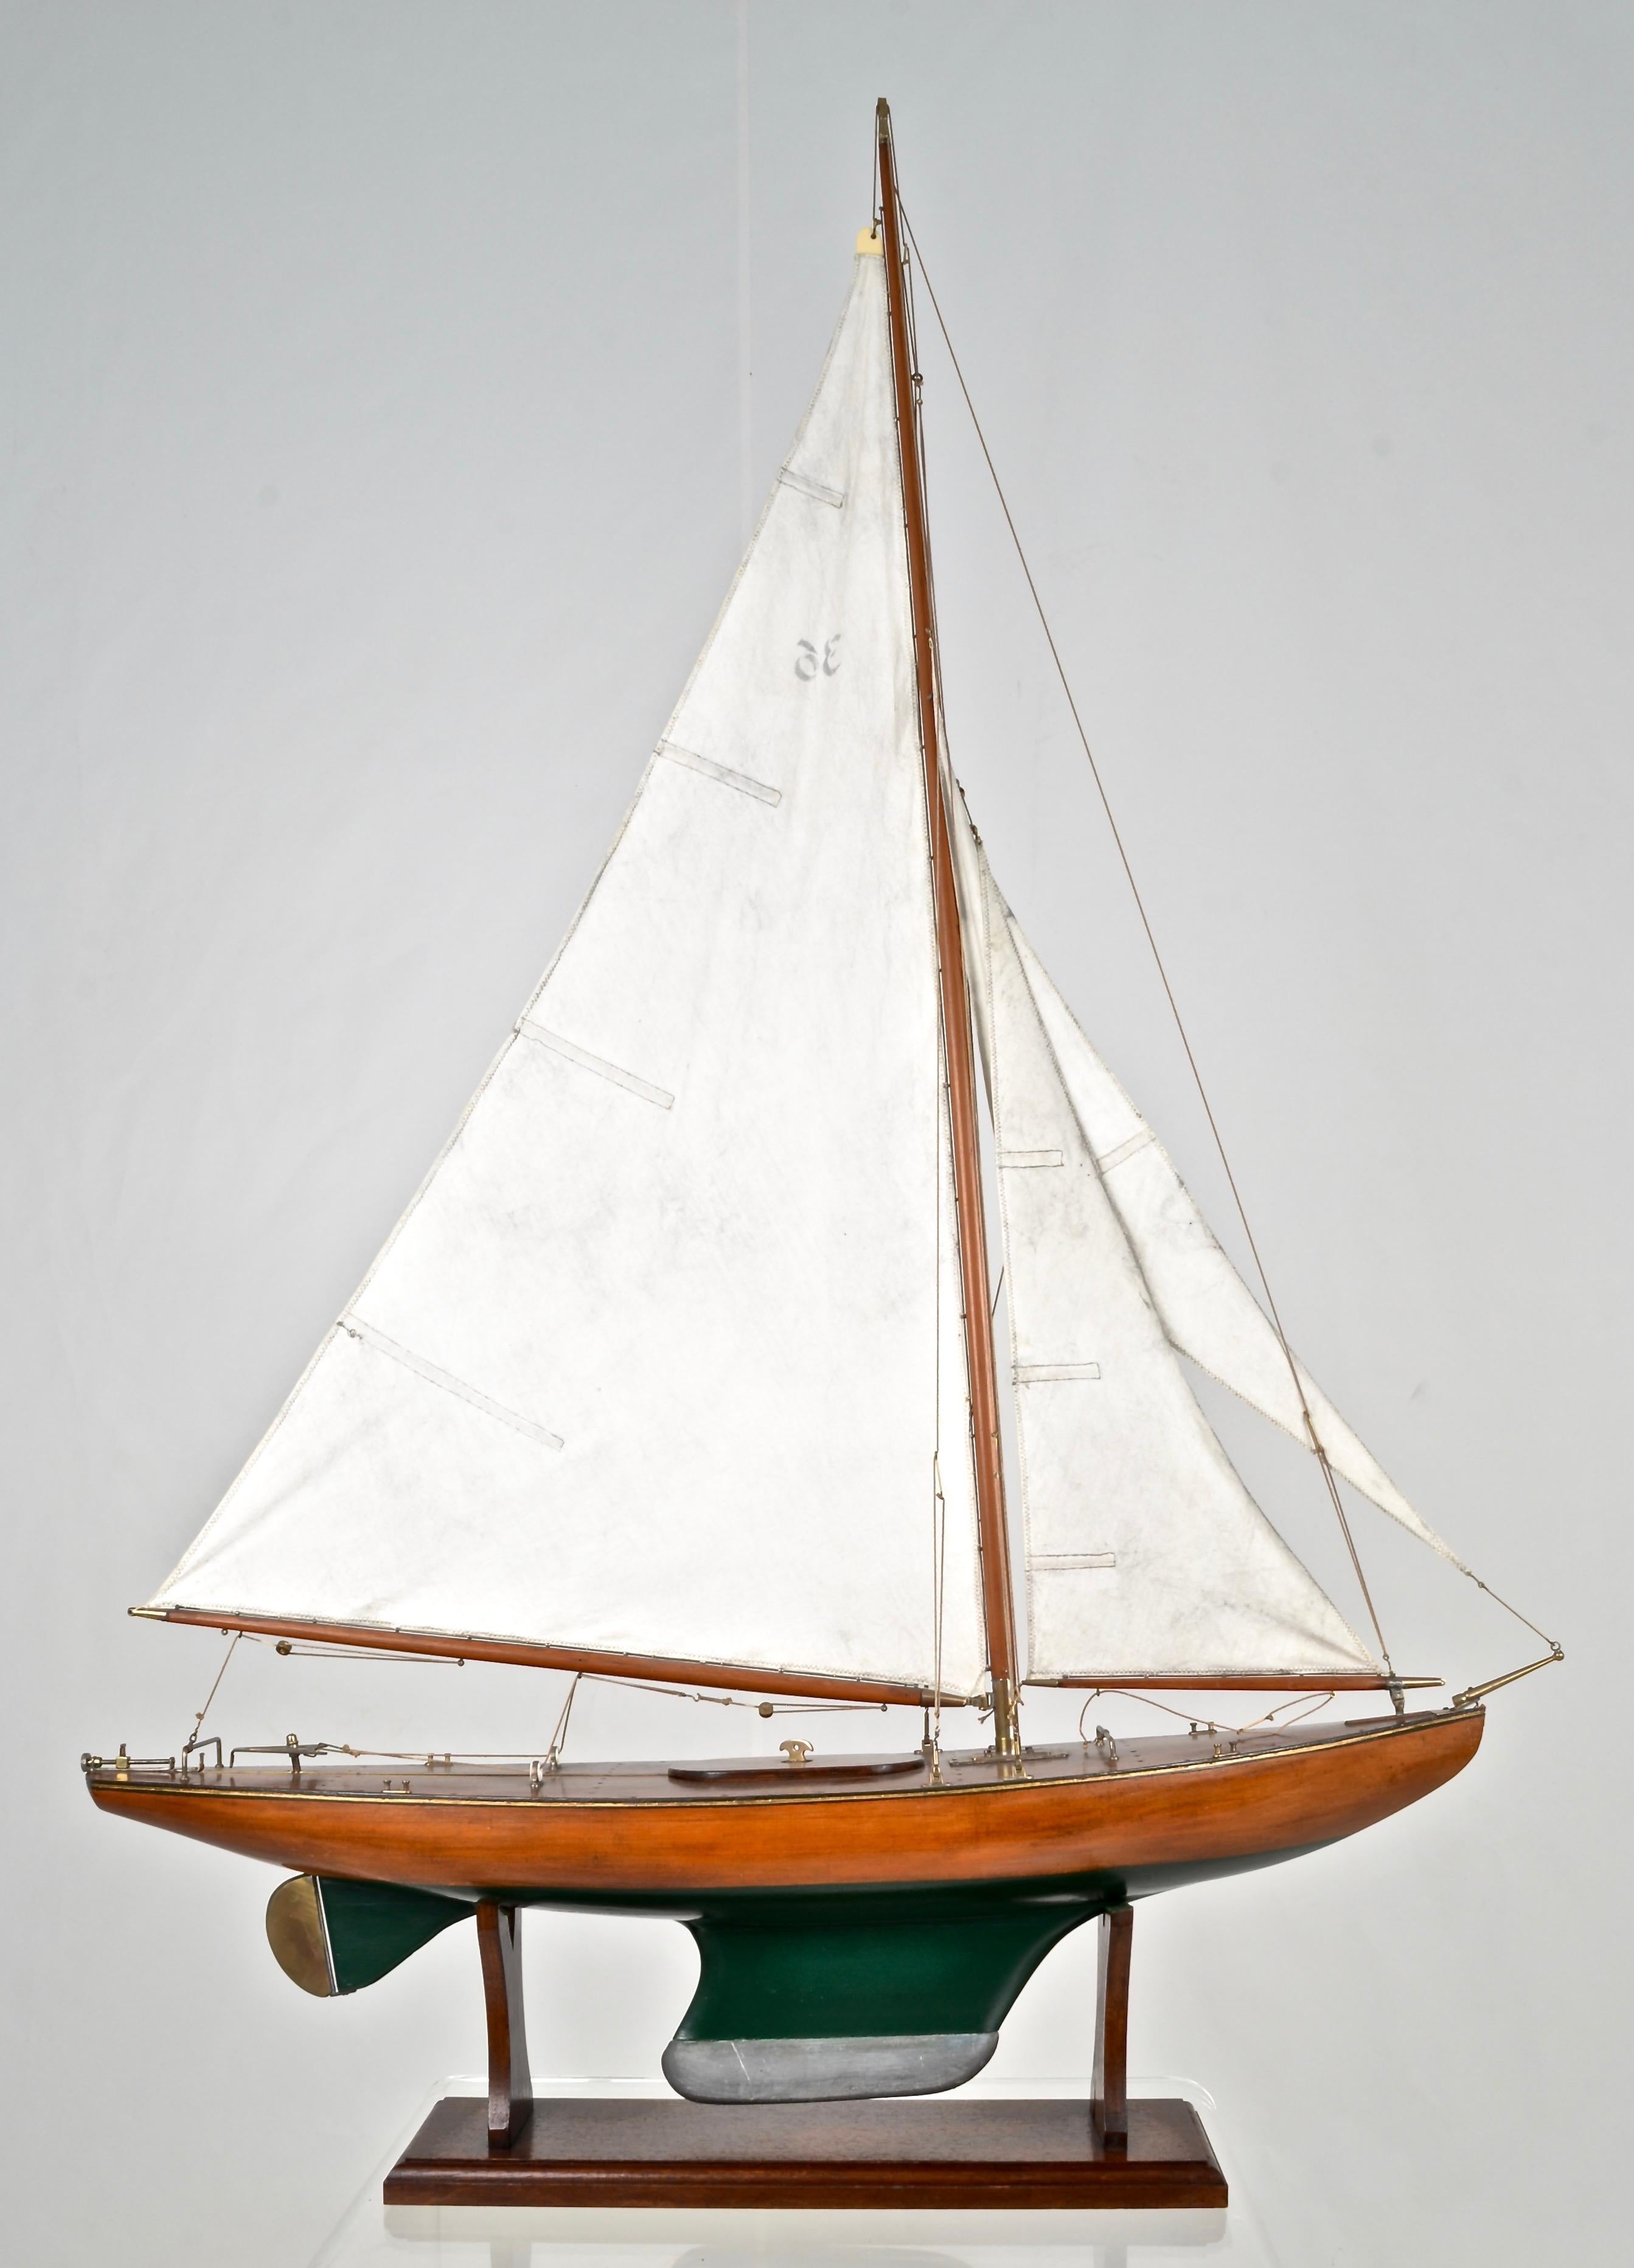 An outstanding example of a traditional pond boat featuring great details such as planked deck and unusual brass fittings. Cutter rigged. Weighted keel. Very nice size at 39 inches total length and 56 inch height. Custom stand. Very fine condition.